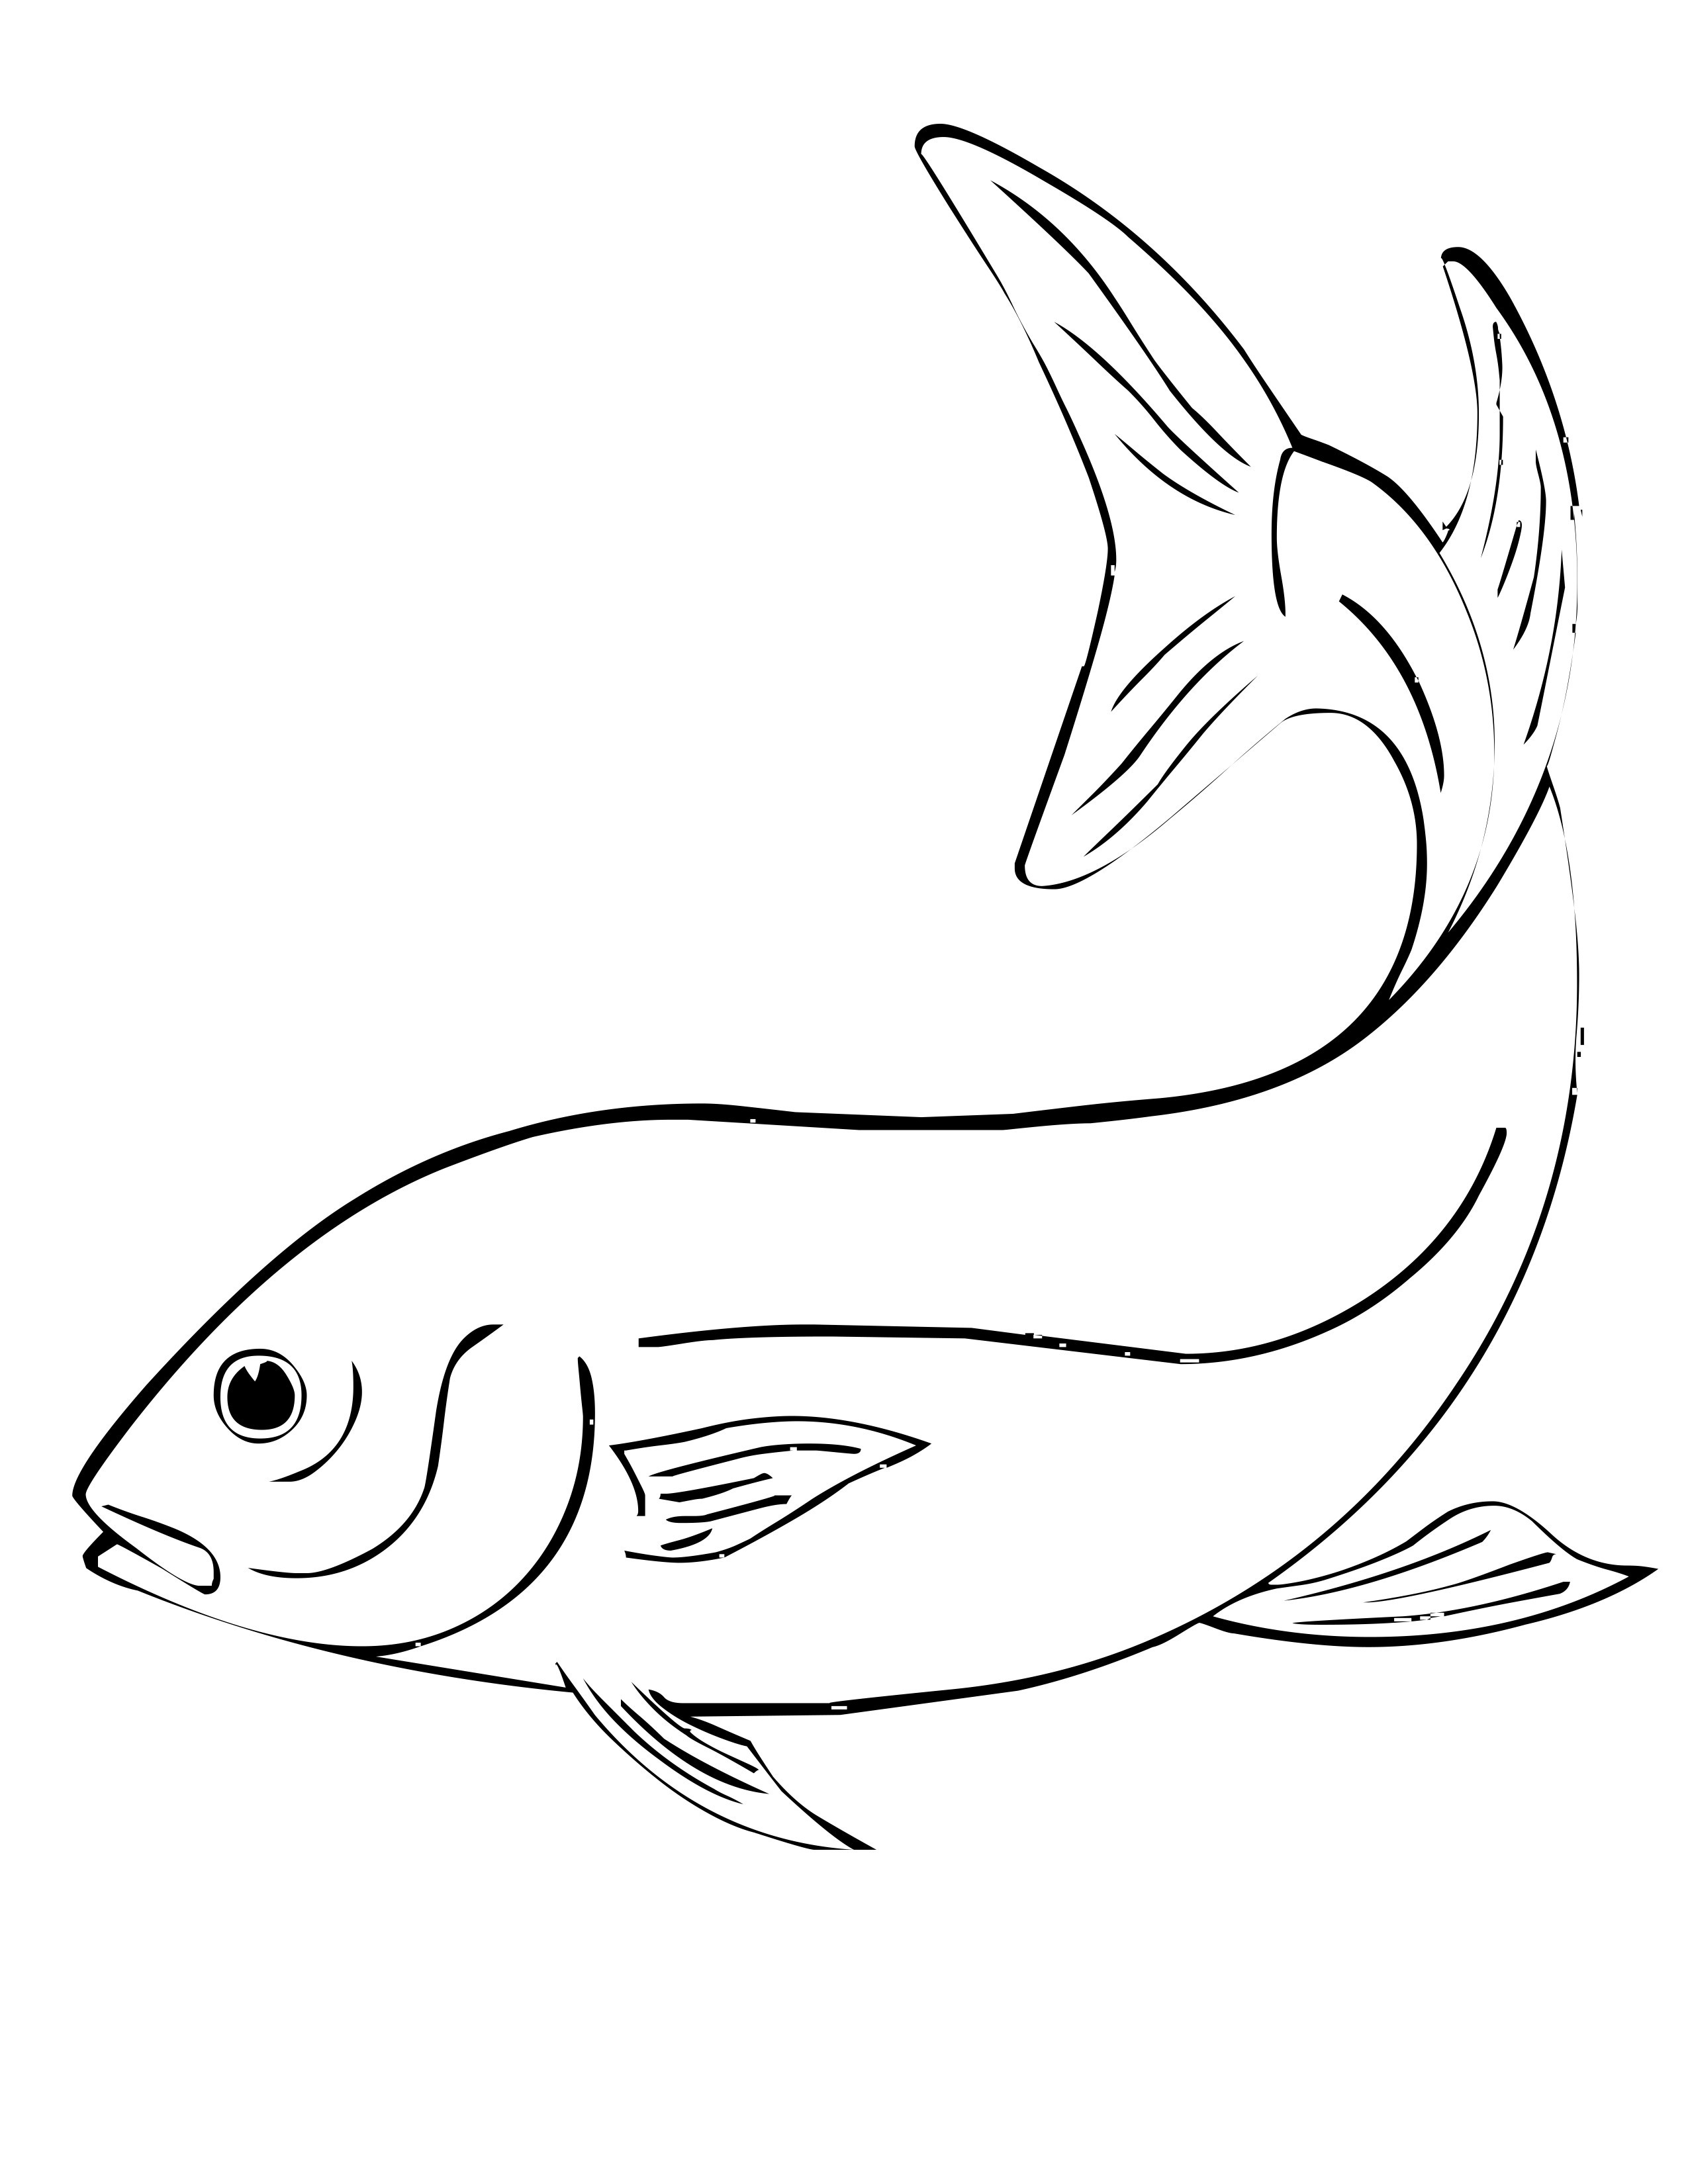 siamese-fighting-fish-coloring-pages-of-siamese-fighting-fish-coloring-pages Siamese Fighting Fish Coloring Pages Animal 